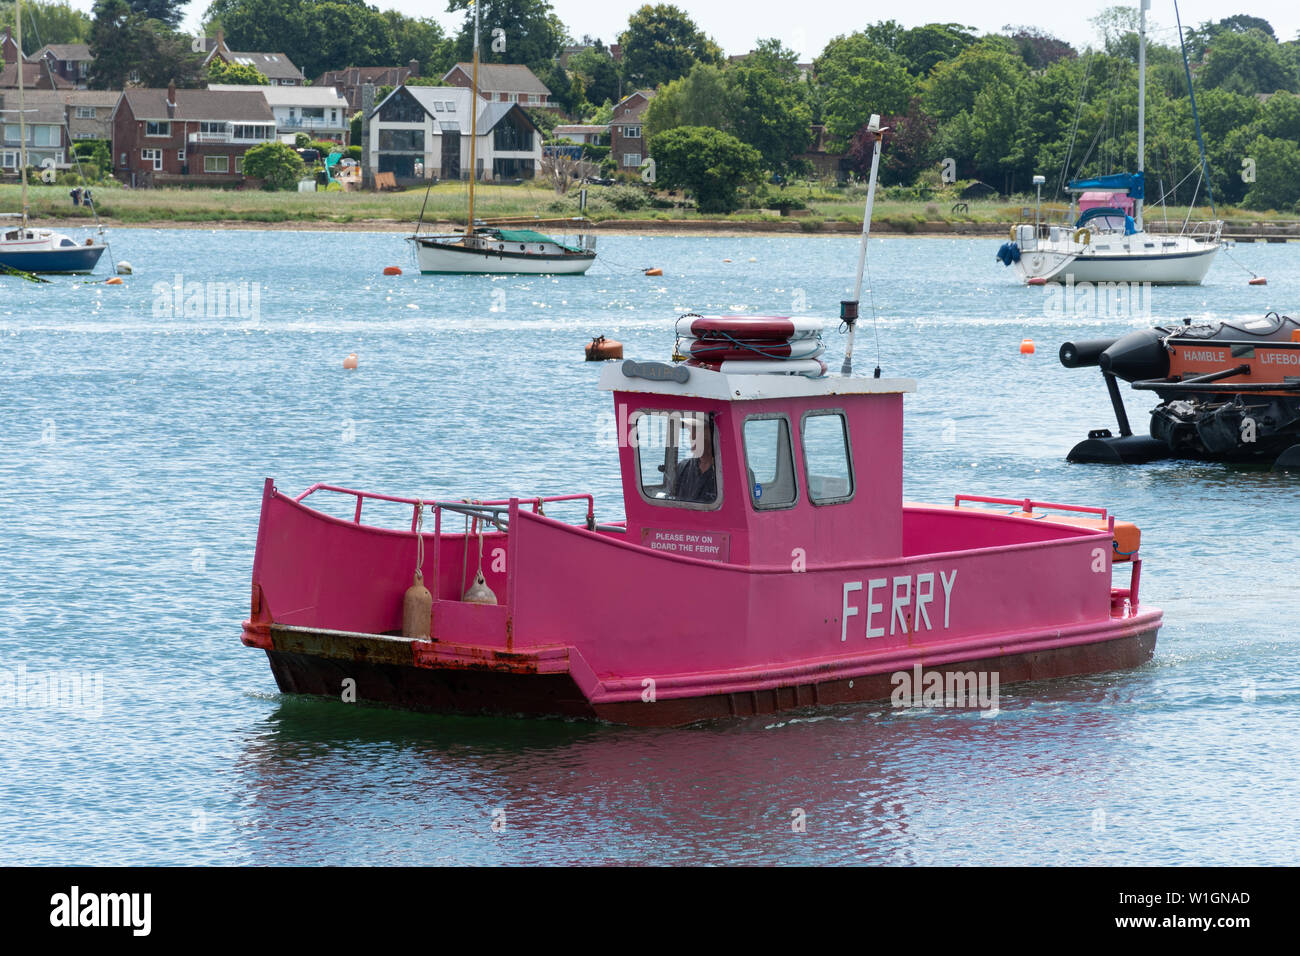 The pink ferry on the River Hamble which transports passengers between Hamble (Hamble-le-Rice) and Warsash, Hampshire, UK Stock Photo